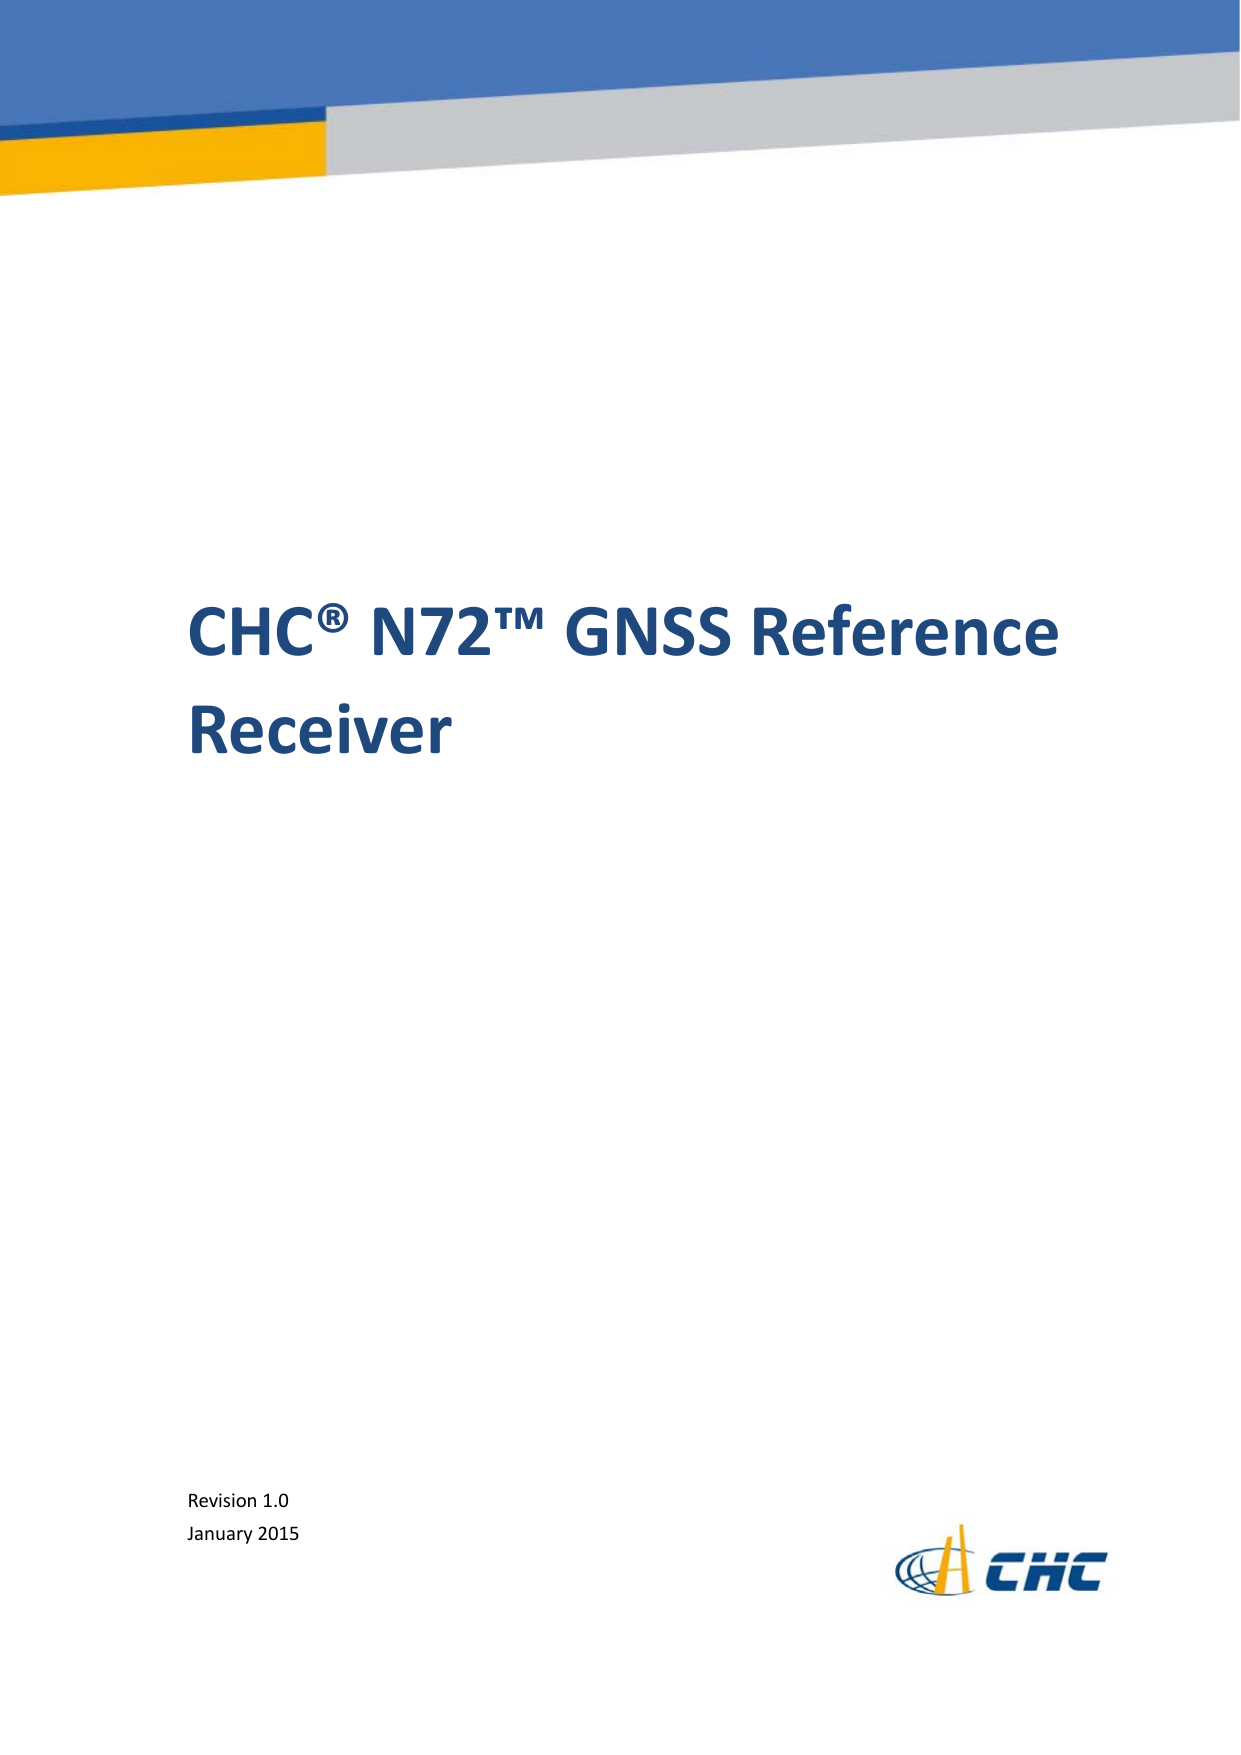 SafetyInformationilCHC®N72™GNSSReferenceReceiverRevision1.0January2015